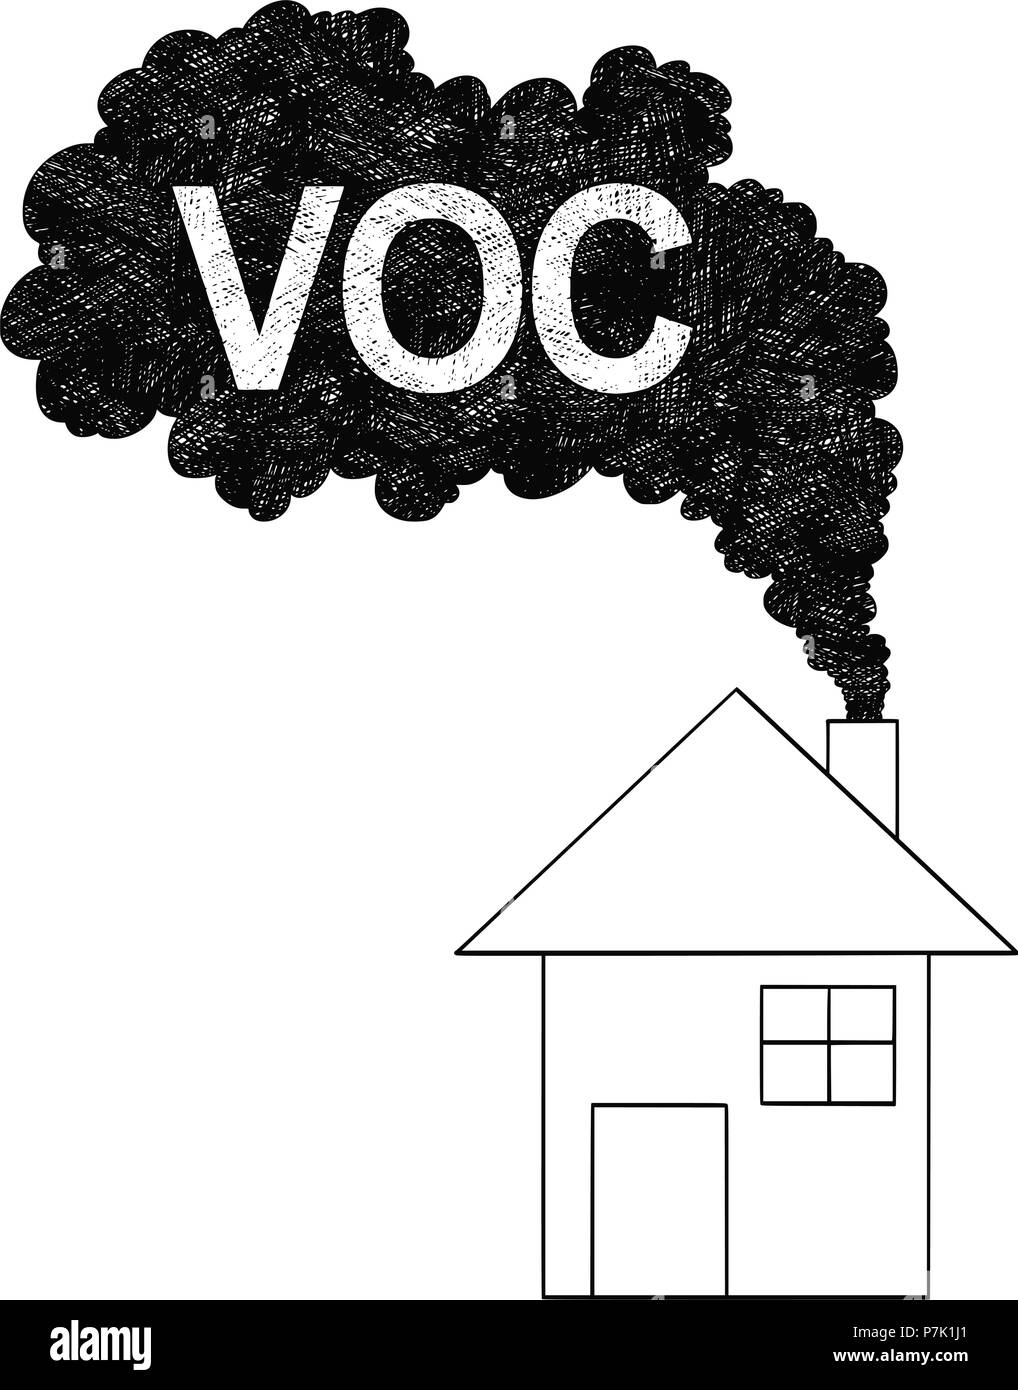 Vector Artistic Drawing Illustration of Smoke Coming from House Chimney, VOC or Volatile Organic Compound Air Pollution Concept Stock Vector